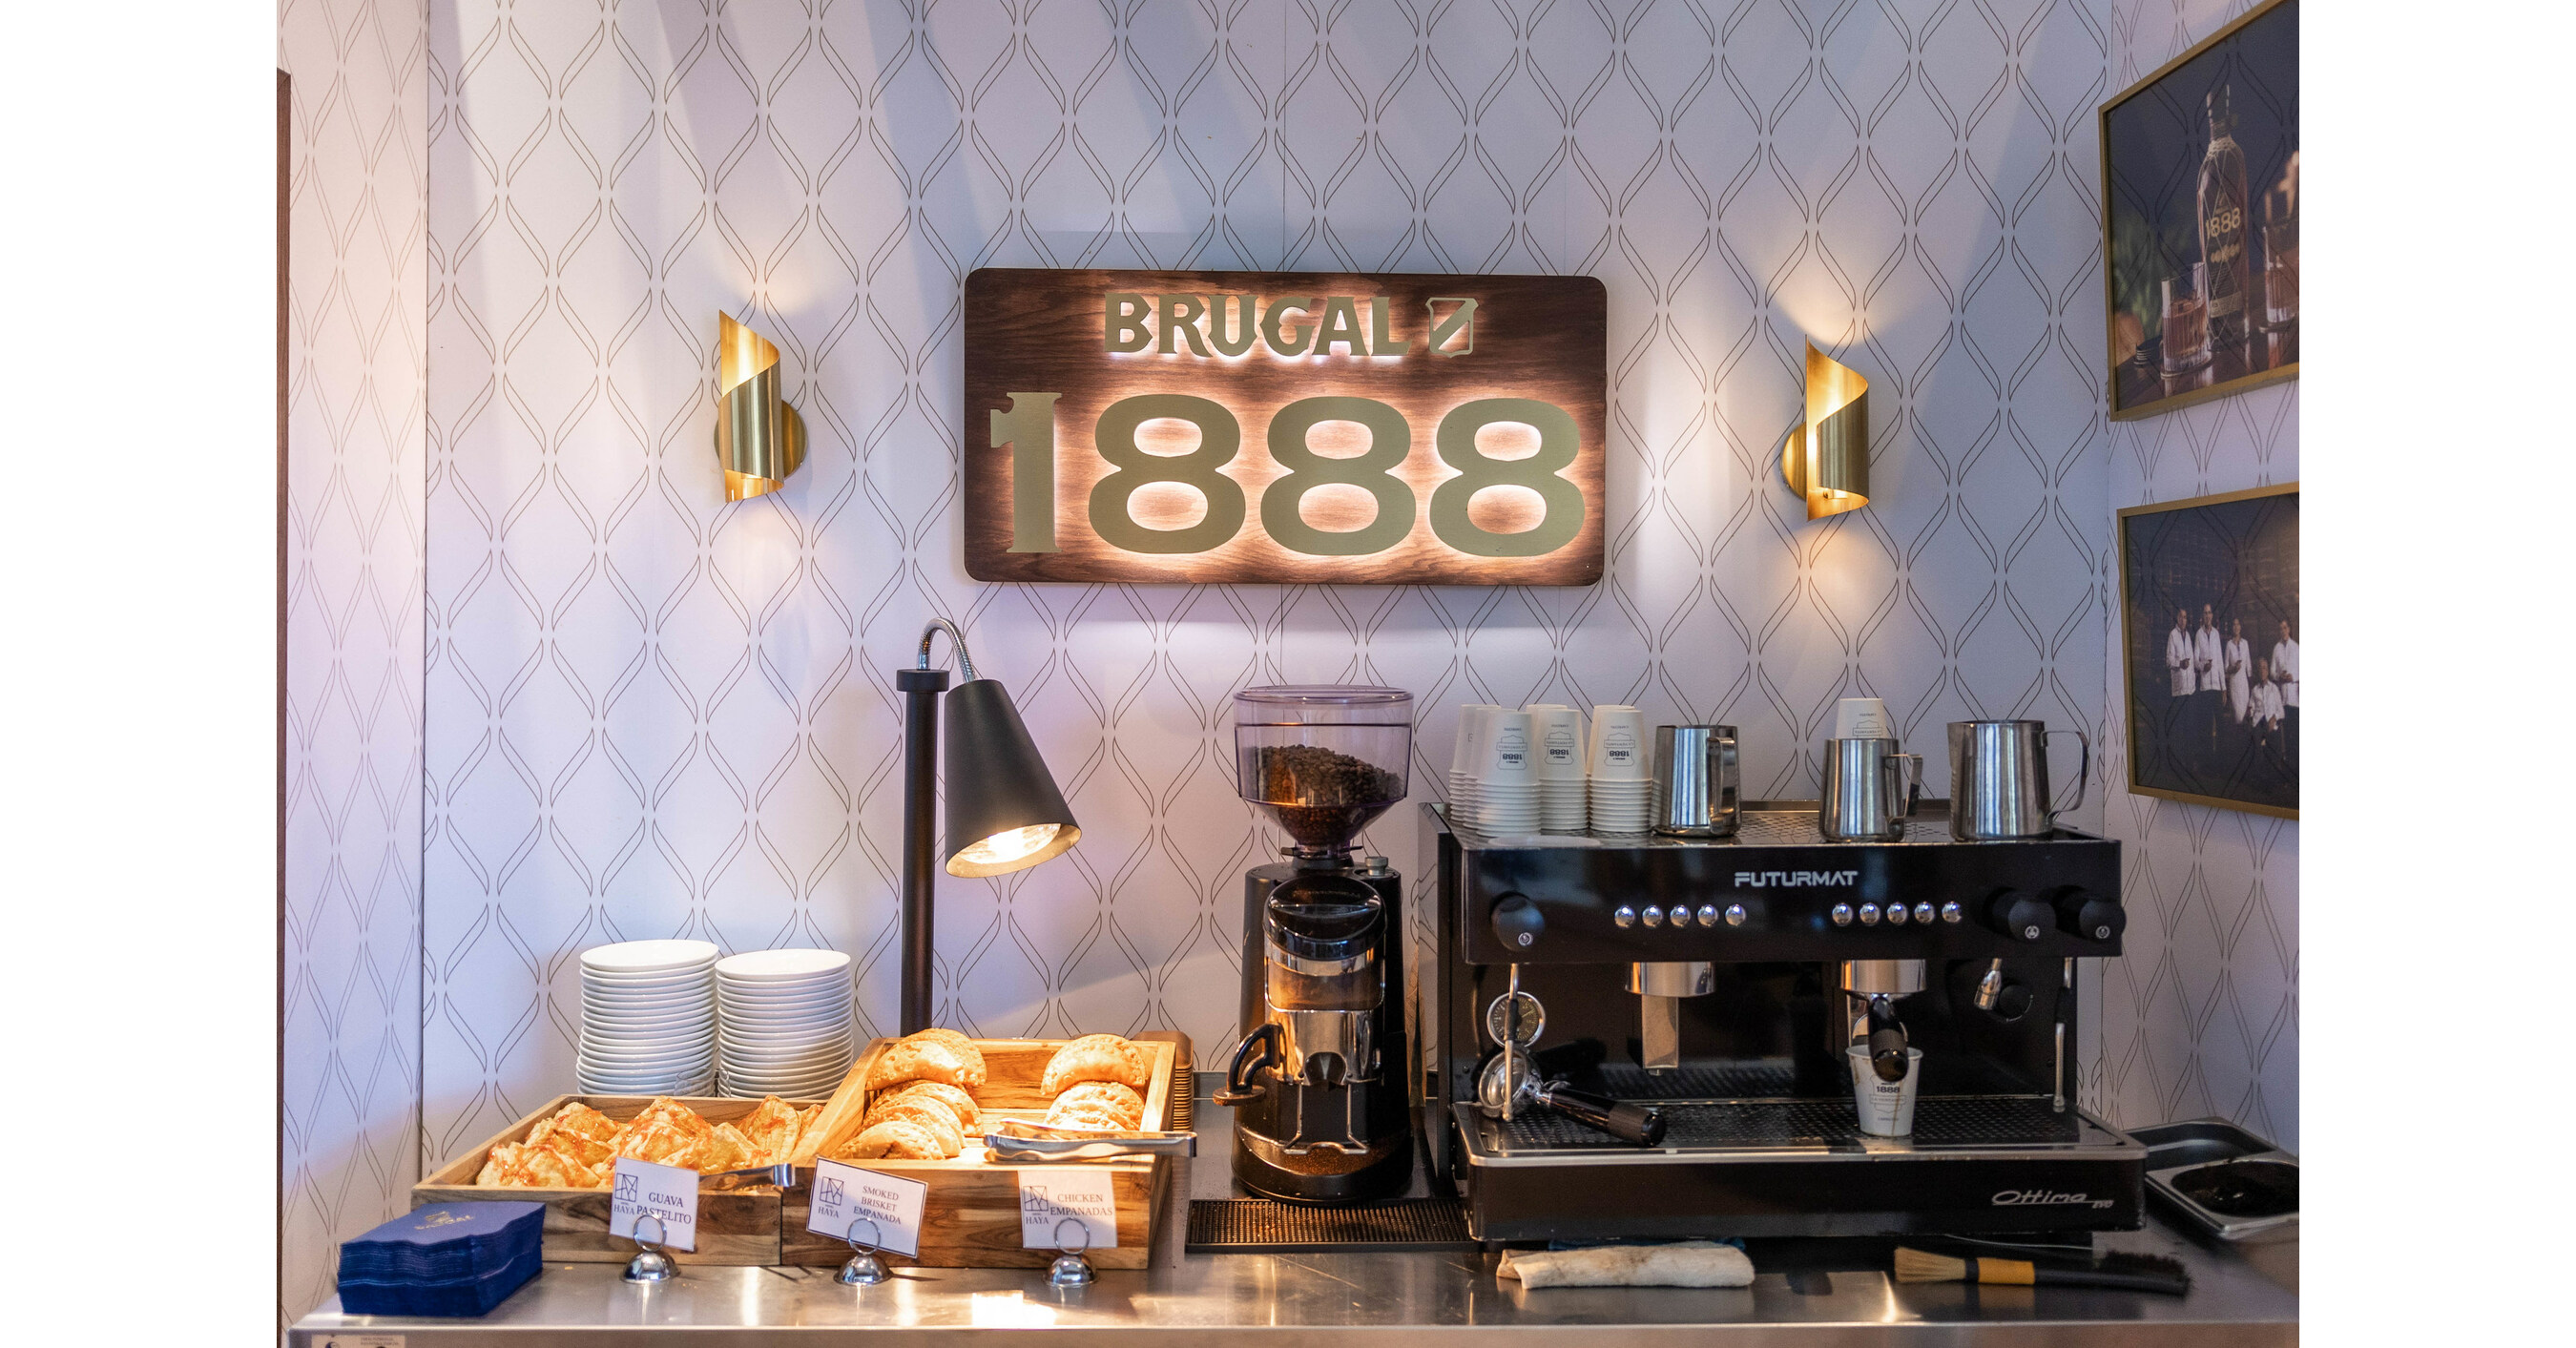 Brugal 1888 Announces the Return of \'Wonders Await at La Ventanita\' With  New Mobile Experience Journeying Across Florida